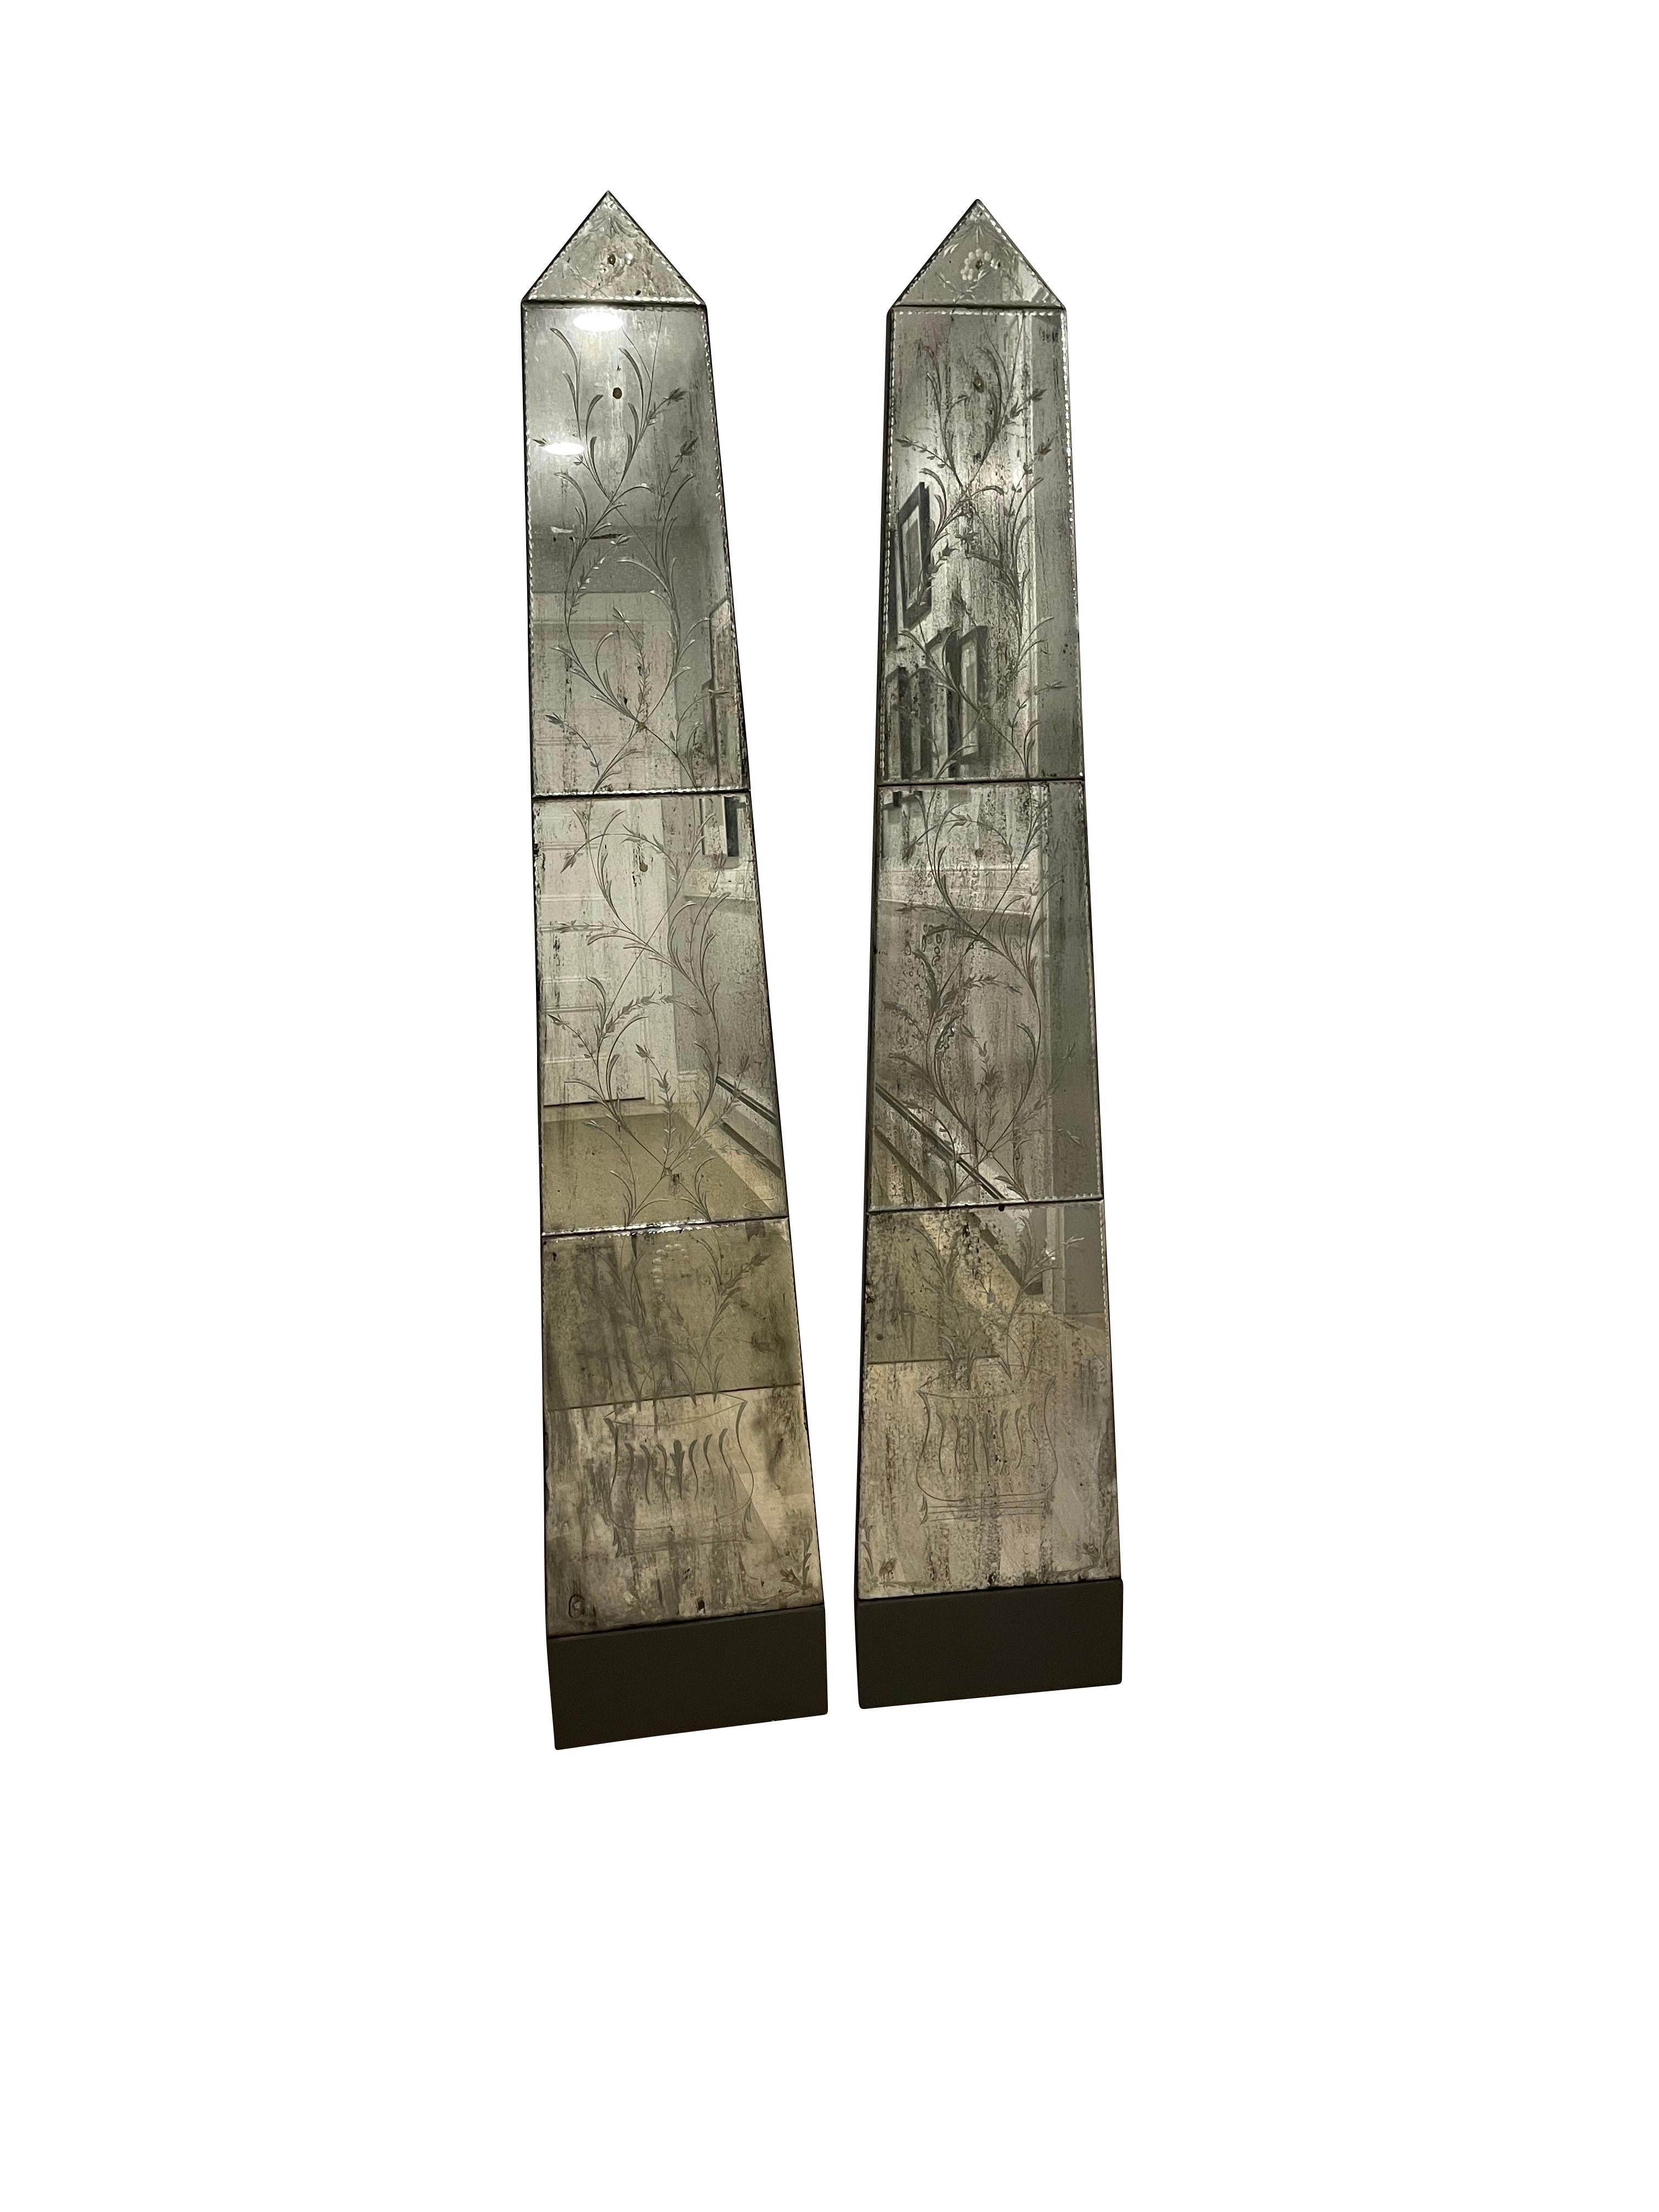 Pair of Venetian obelisk form mirrored panels with botanical etchings from the 1980s. Each with multiple individual beveled panels cut and etched with botanical representations painted black panels on the reverse with proper hardware for hanging.